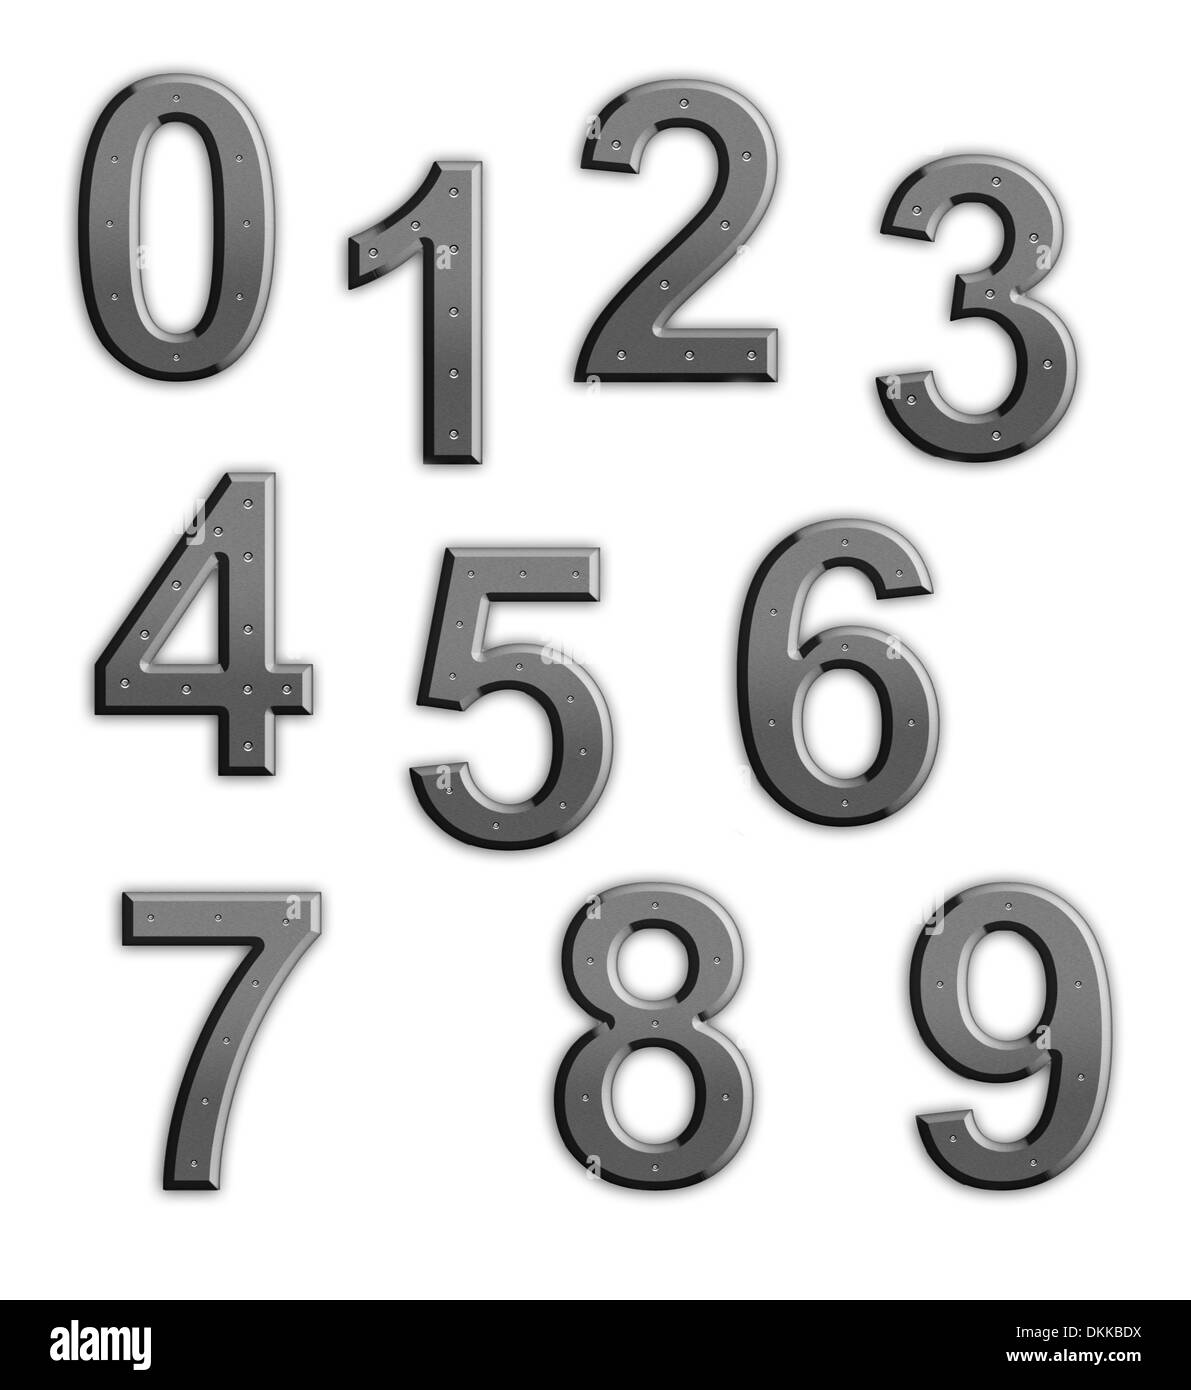 Metal numbers on plain background Stock Photo